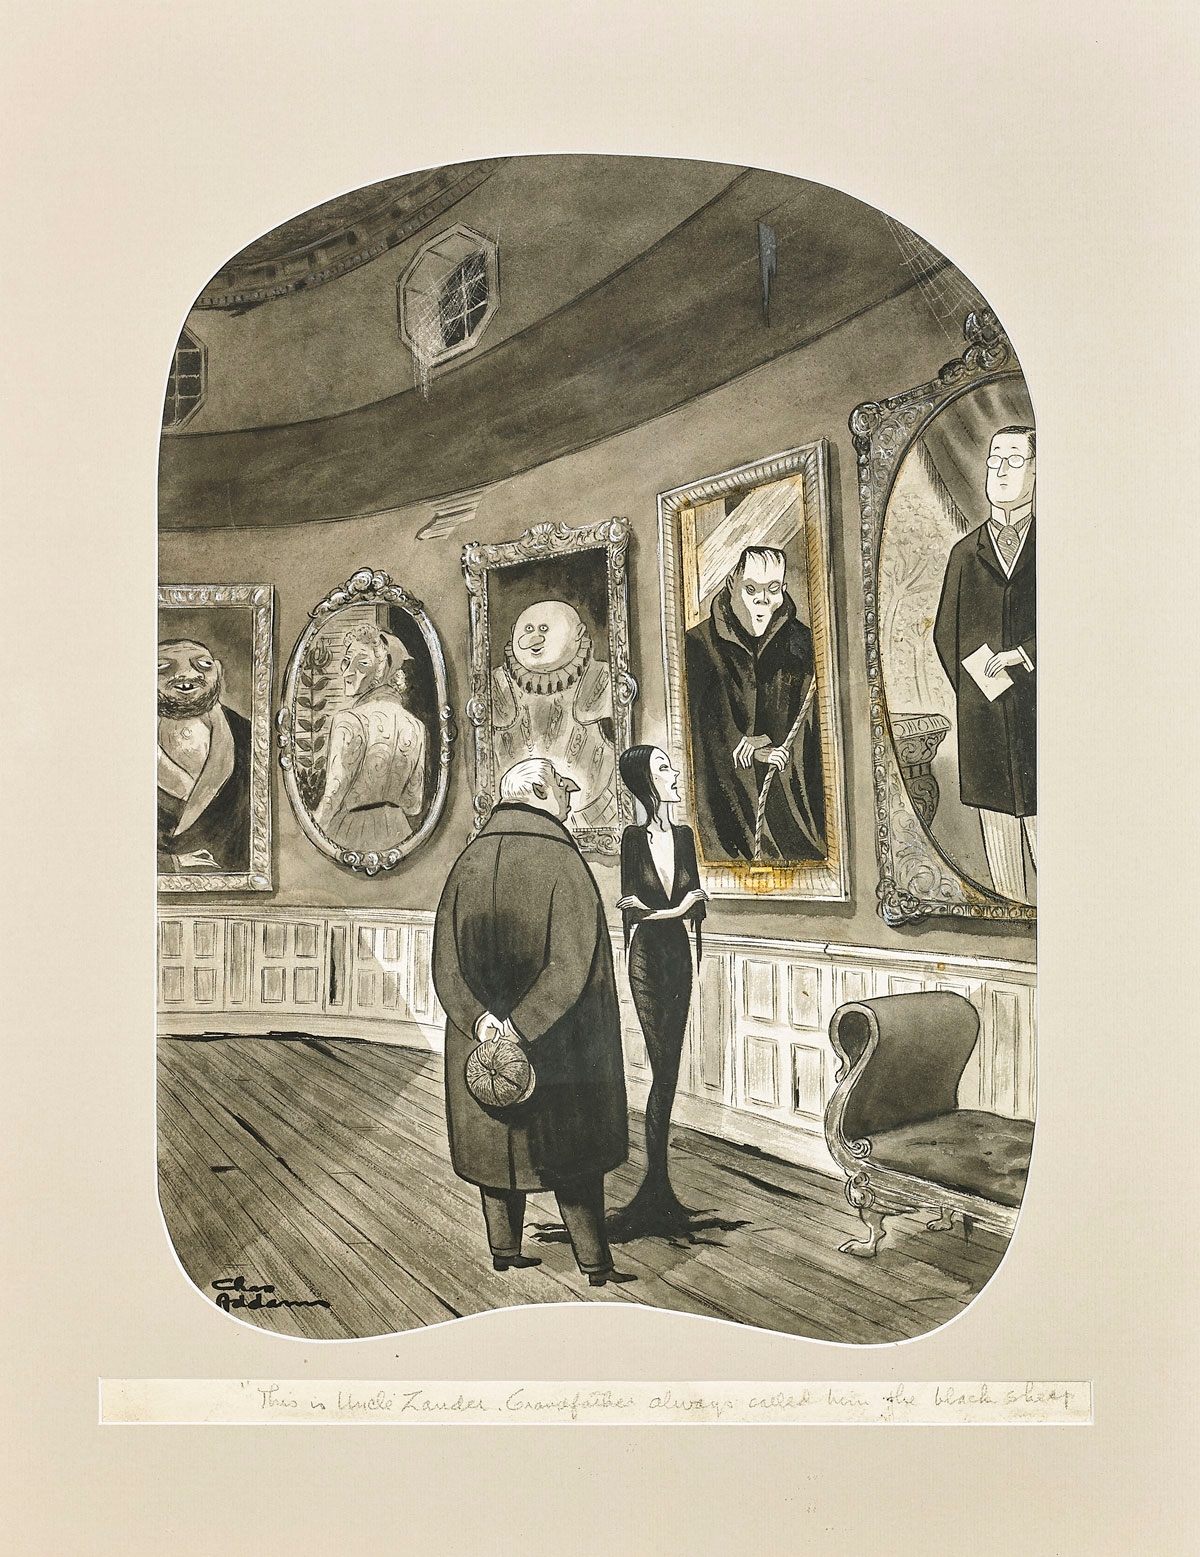 Artwork by Charles Addams, Addams family, Made of Ink, wash and gouache illustration on paper